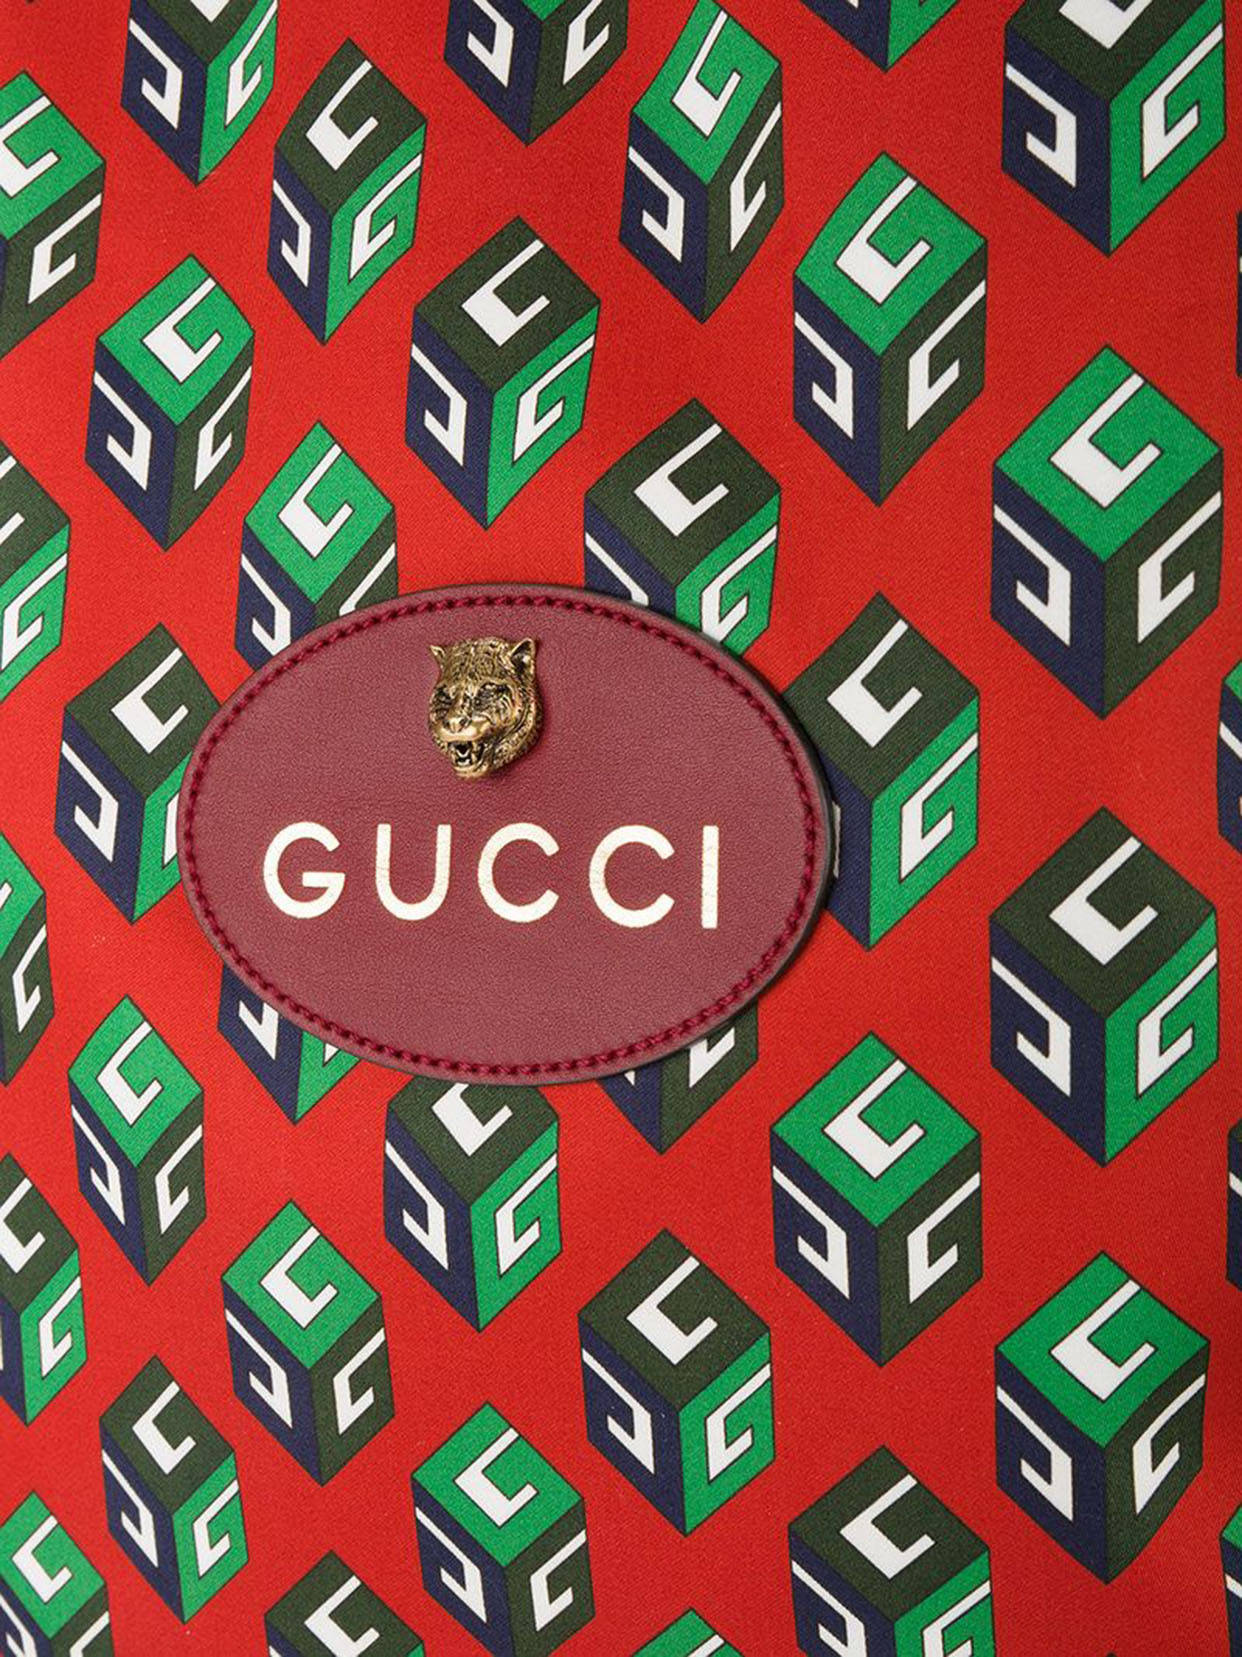 Red And Green Gucci Cube Pattern Wallpaper